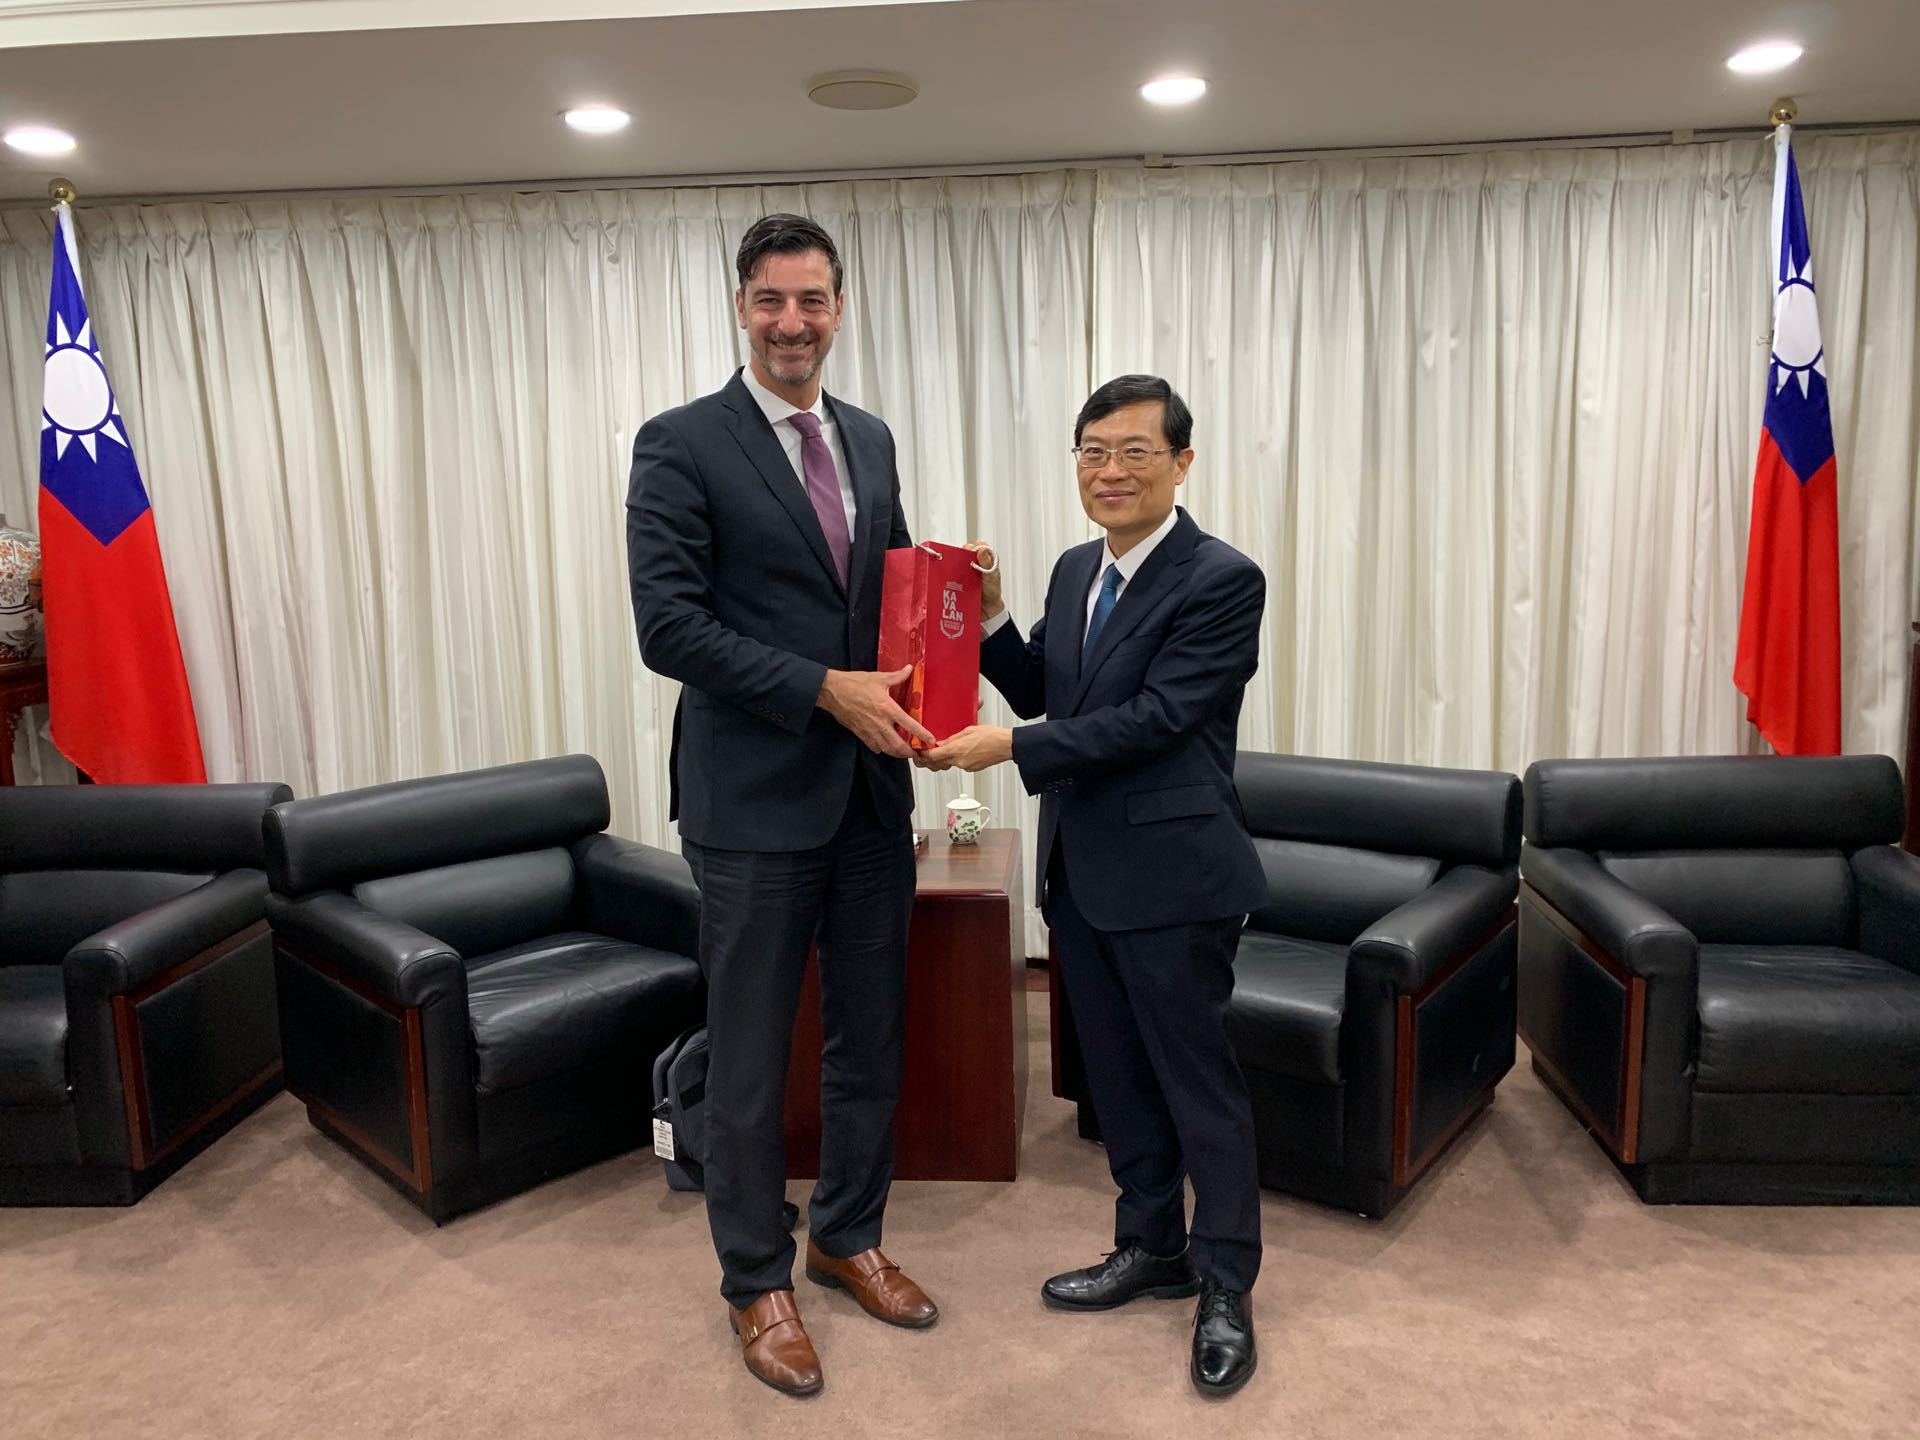 Deputy Minister Chen meets with ISED(Canada) Associate Deputy Minister Francis Bilodeau